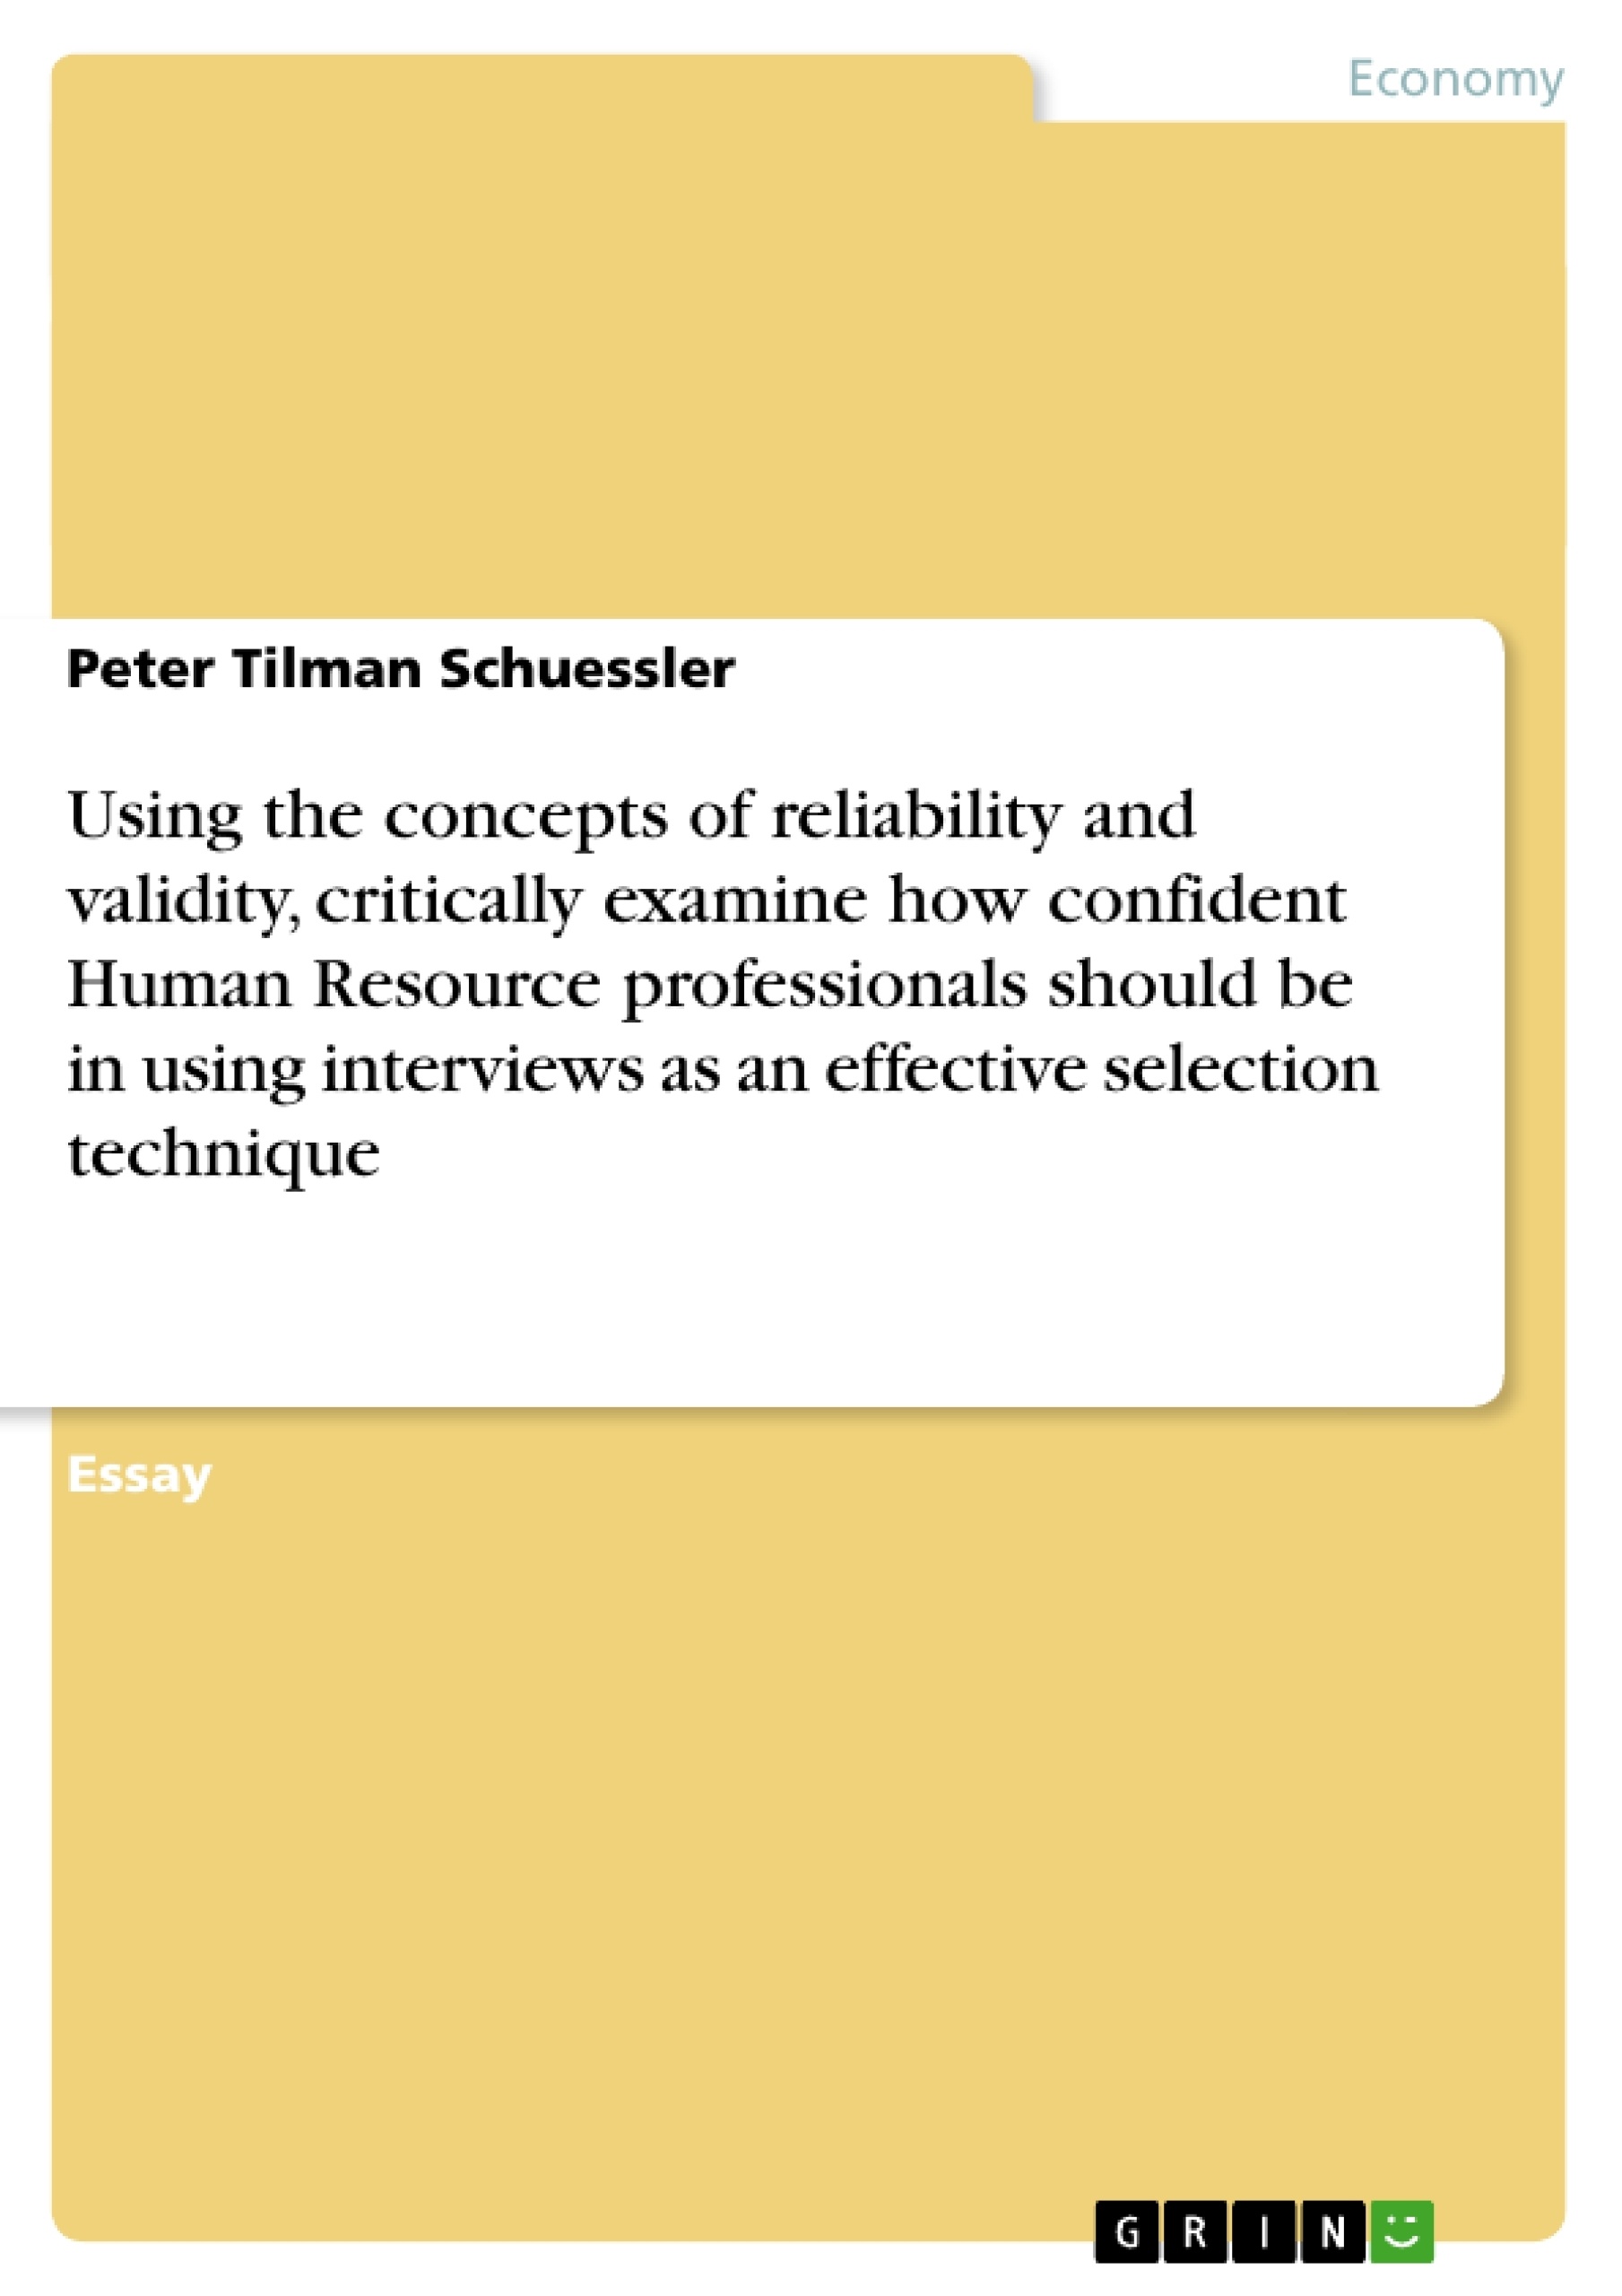 Titre: Using the concepts of reliability and validity, critically examine how confident Human Resource professionals should be in using interviews as an effective selection technique